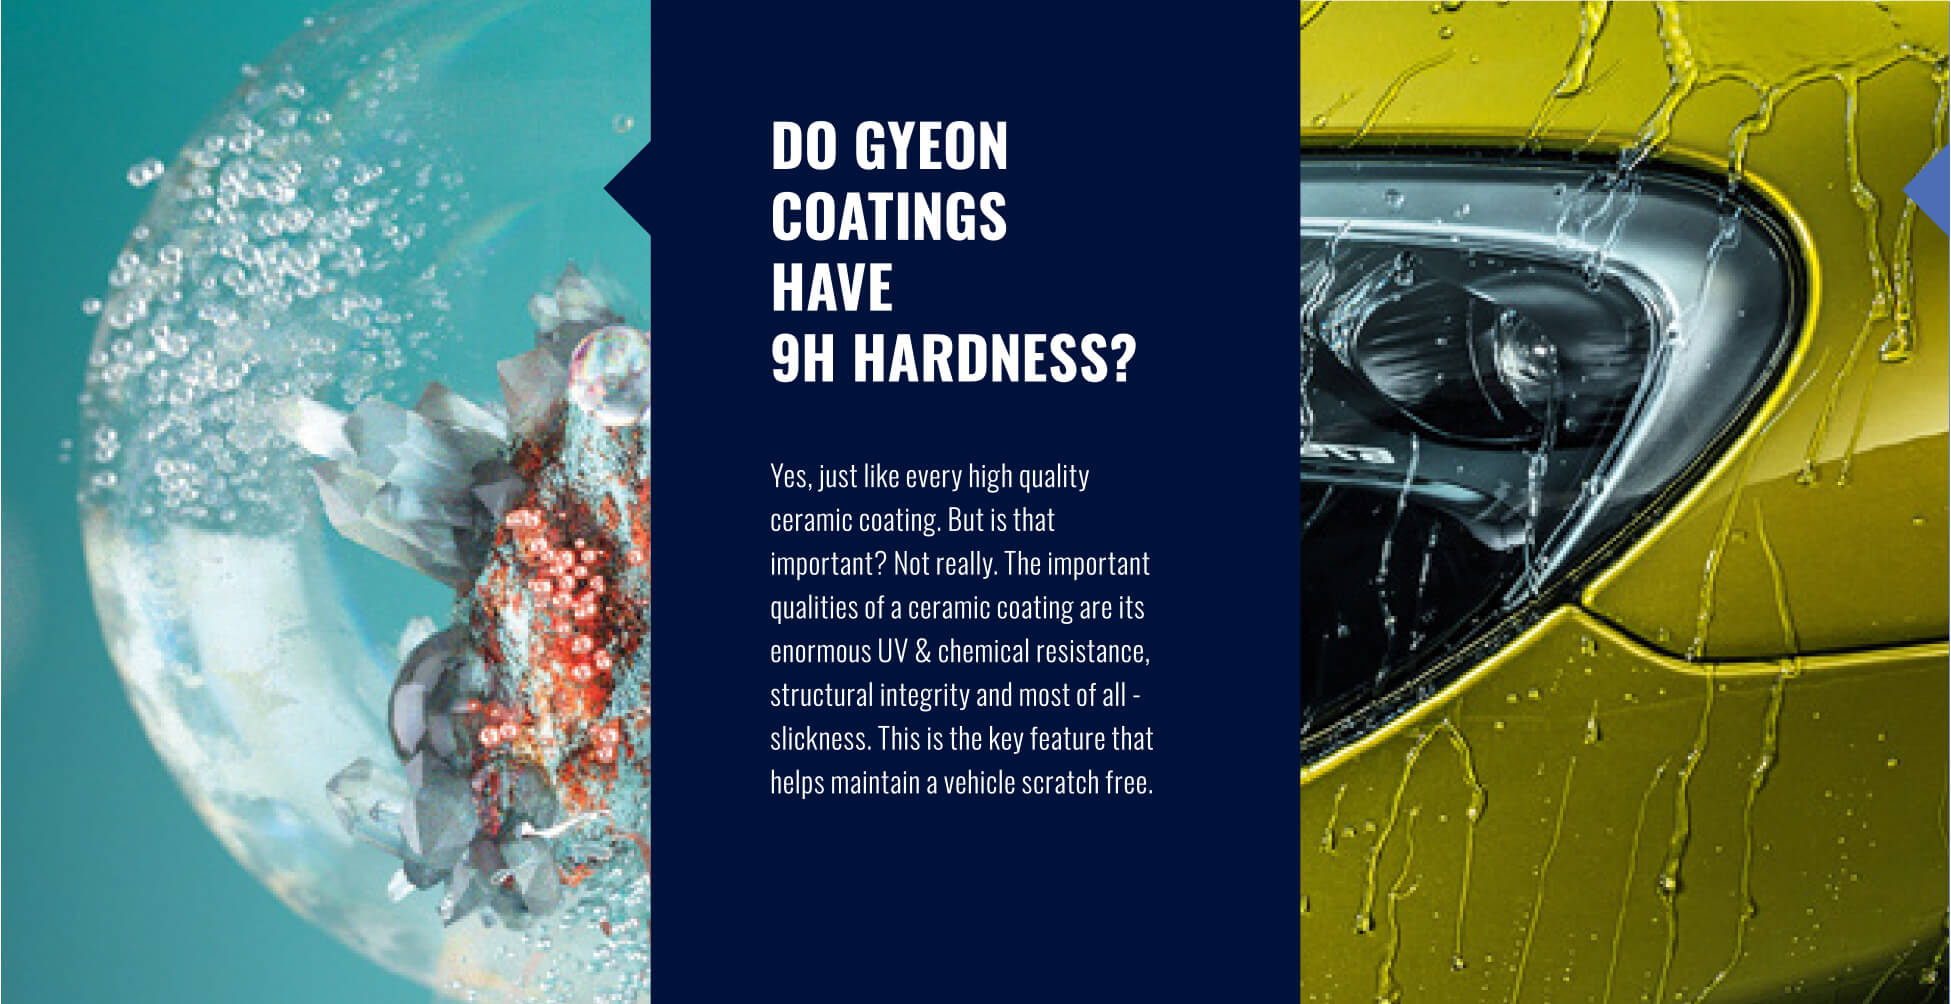 Do gyeon coatings have 9H hardness? Yes, just like every high-quality ceramic coatings. The important qualities of a ceramic coating are its enormous UV and chemical resistance, structural integrity and most of all, slickness and dirt rejection.